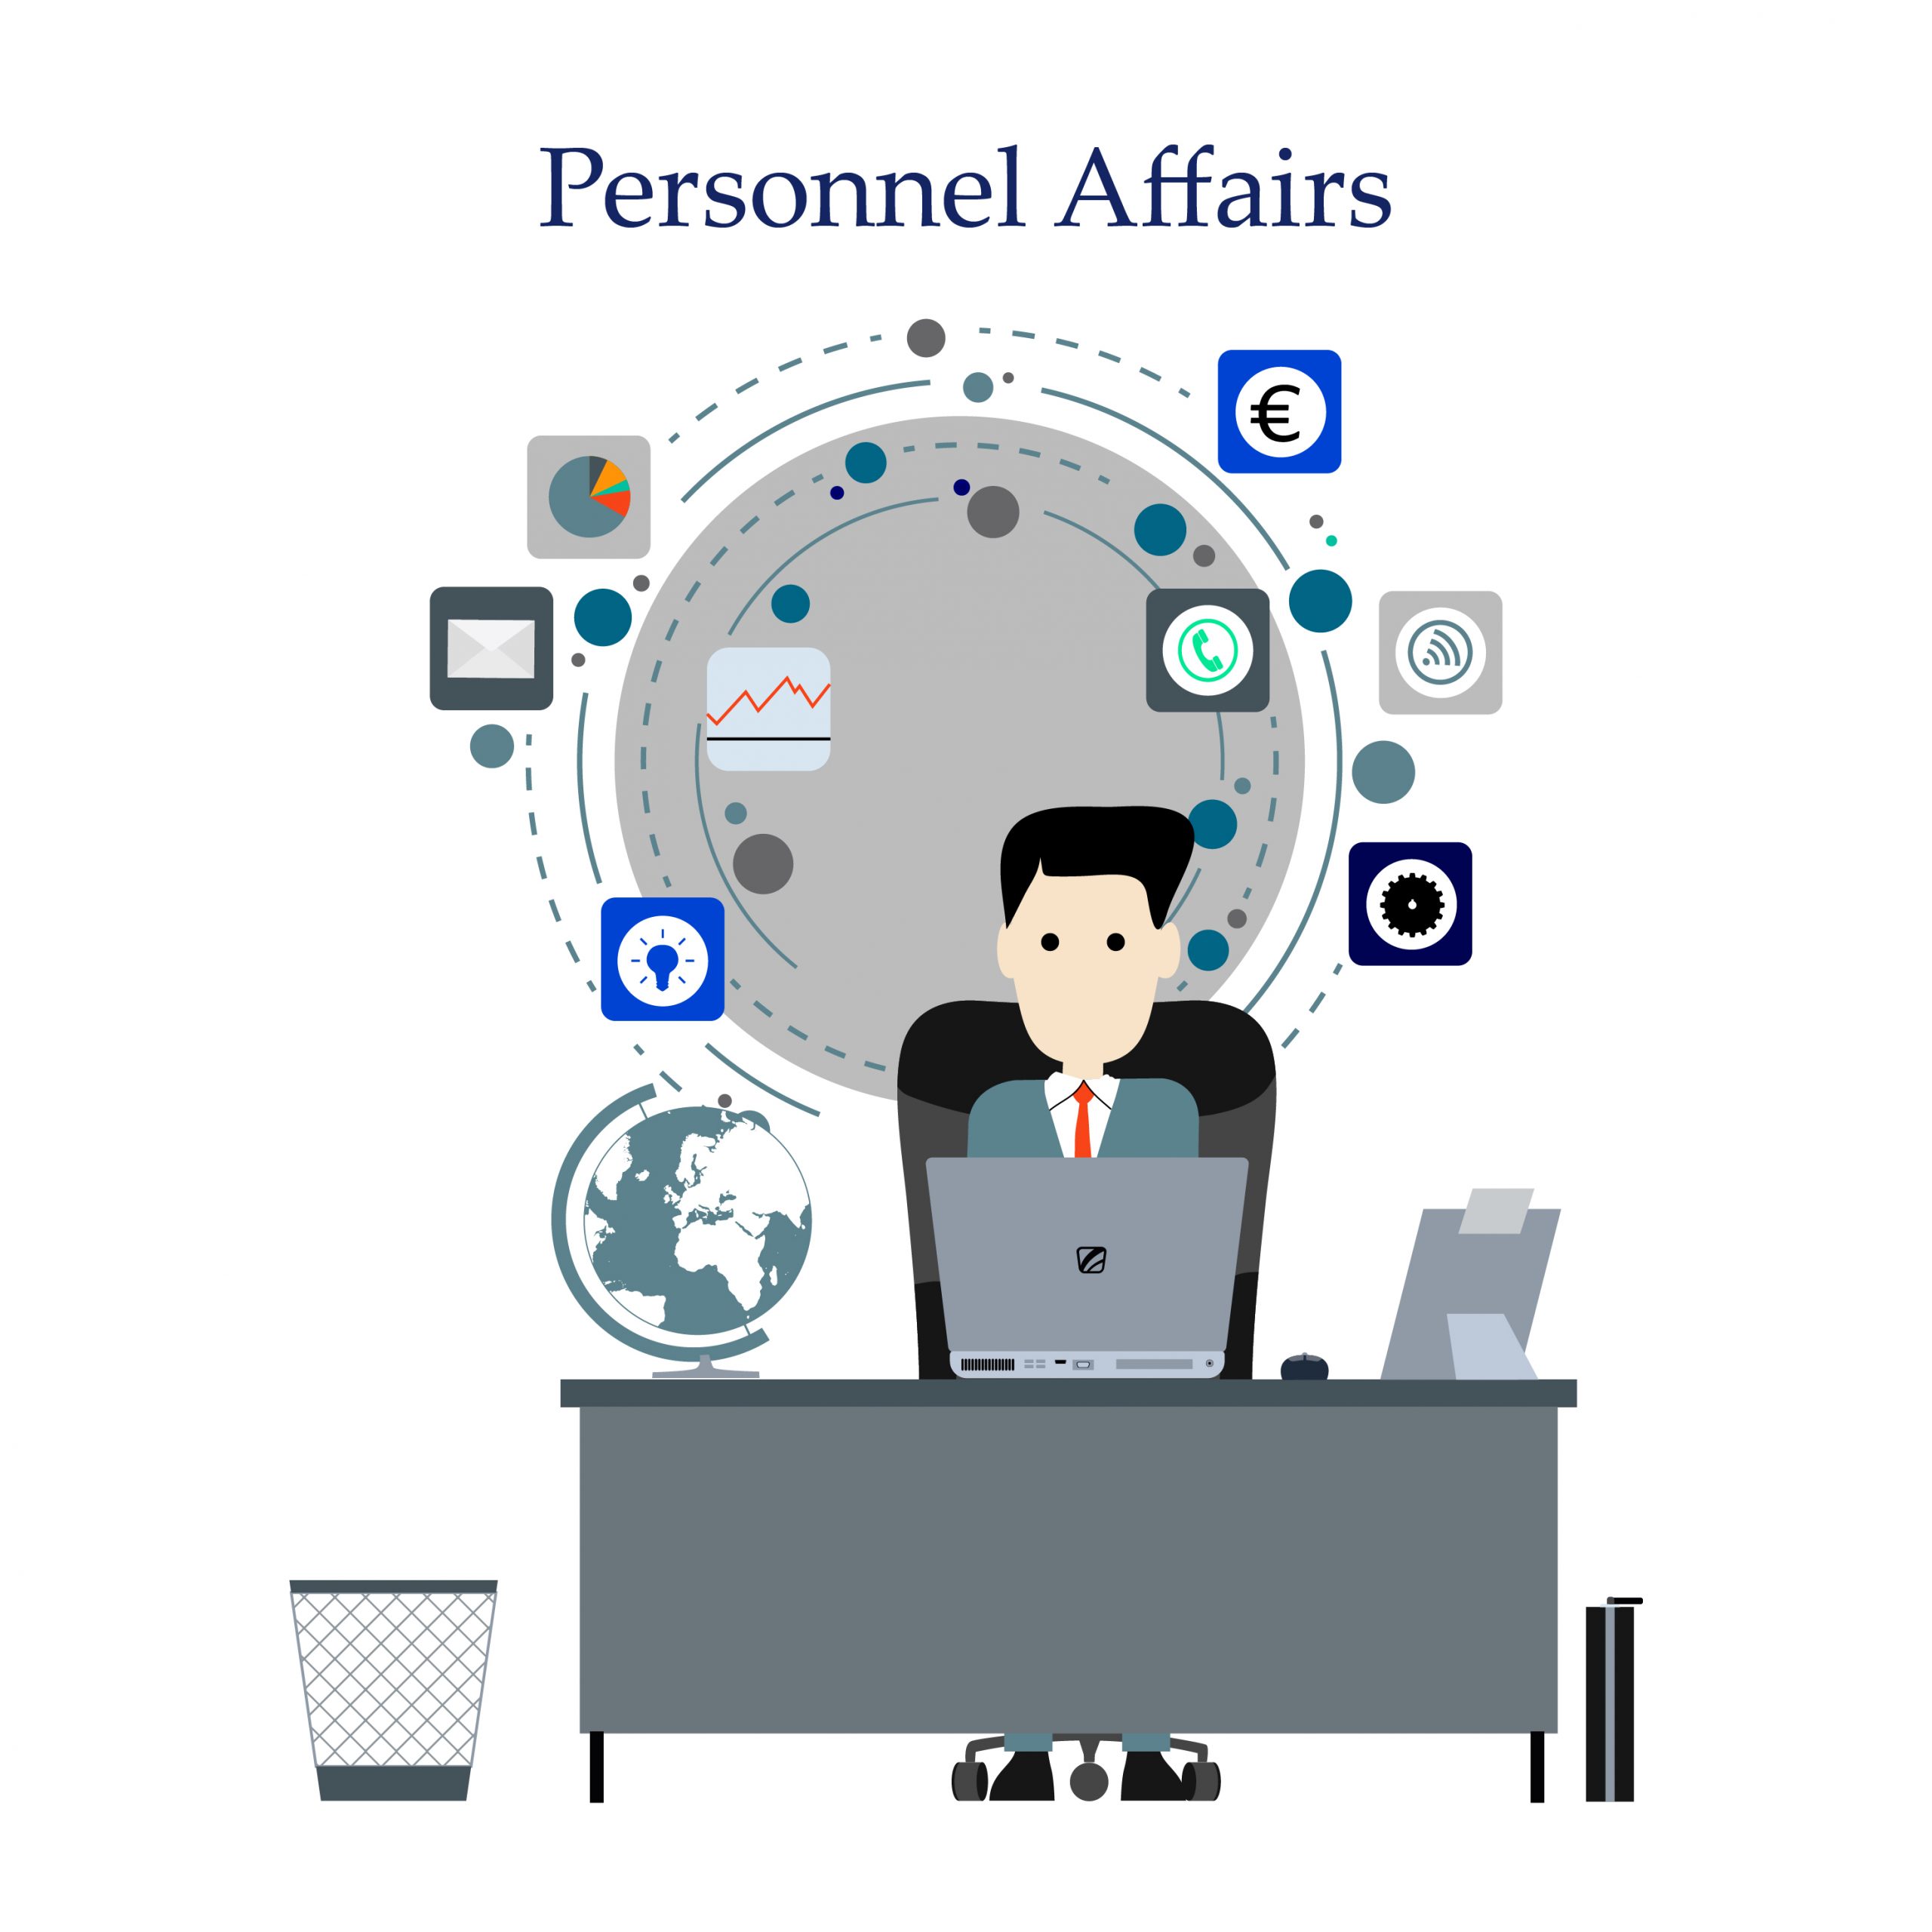 Personnel Affairs